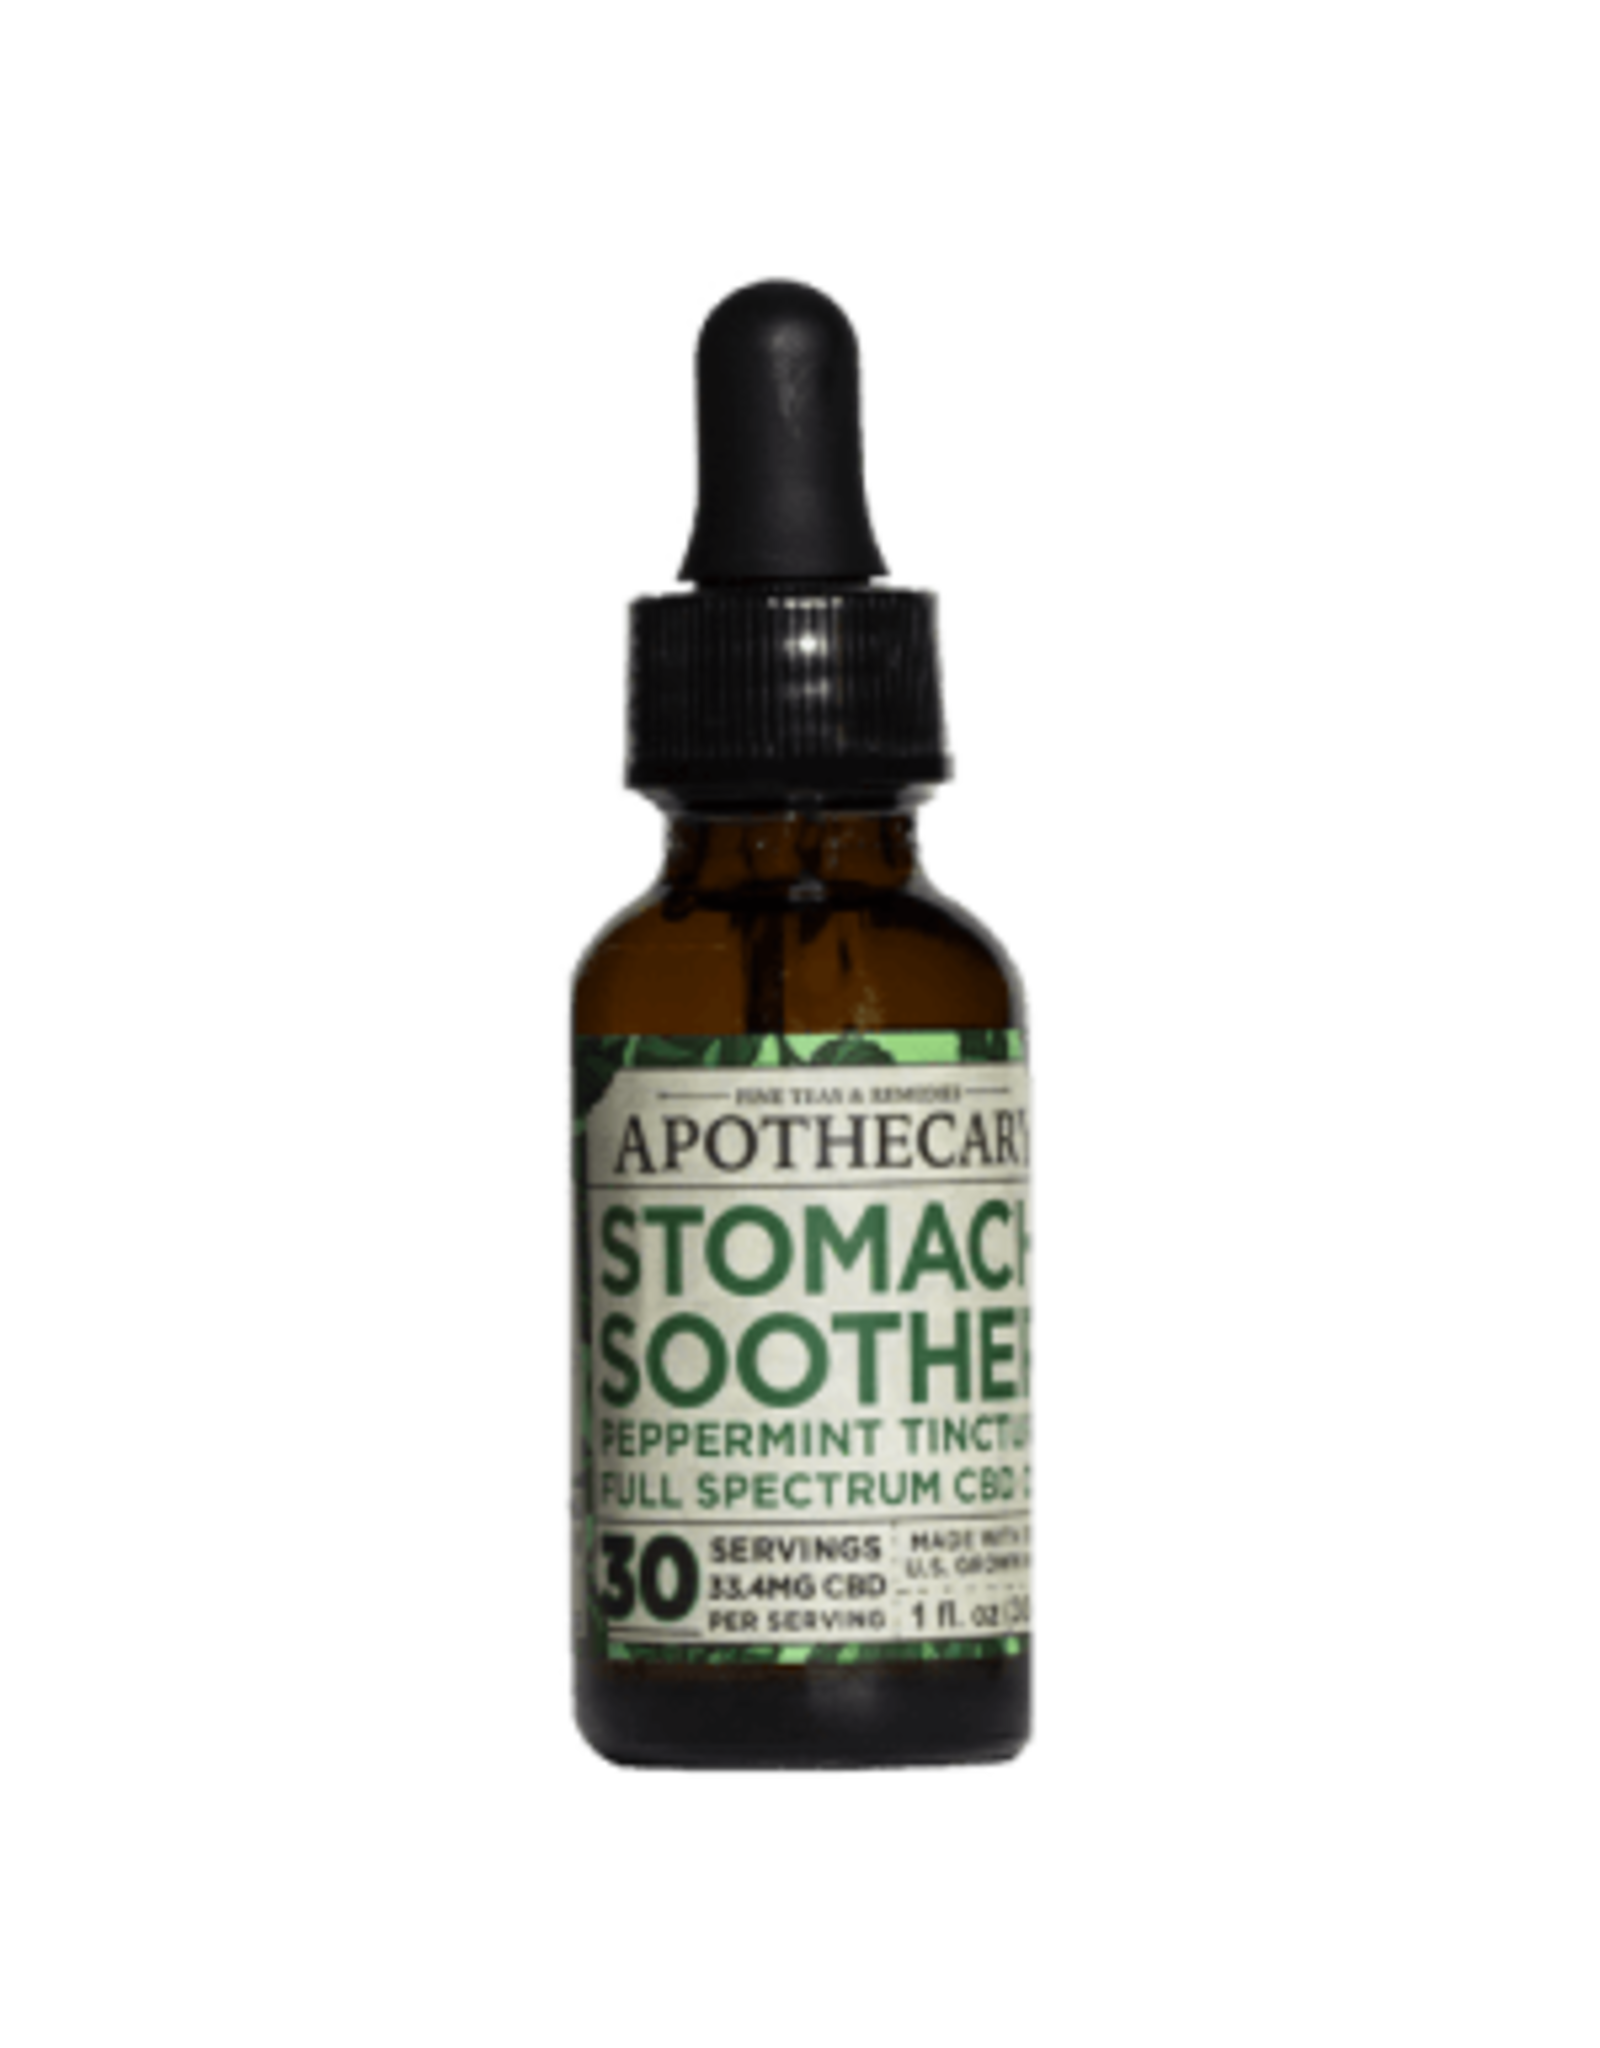 The Brothers Apothecary Brothers Apothecary Stomach Soother | Peppermint Hemp CBD Tincture